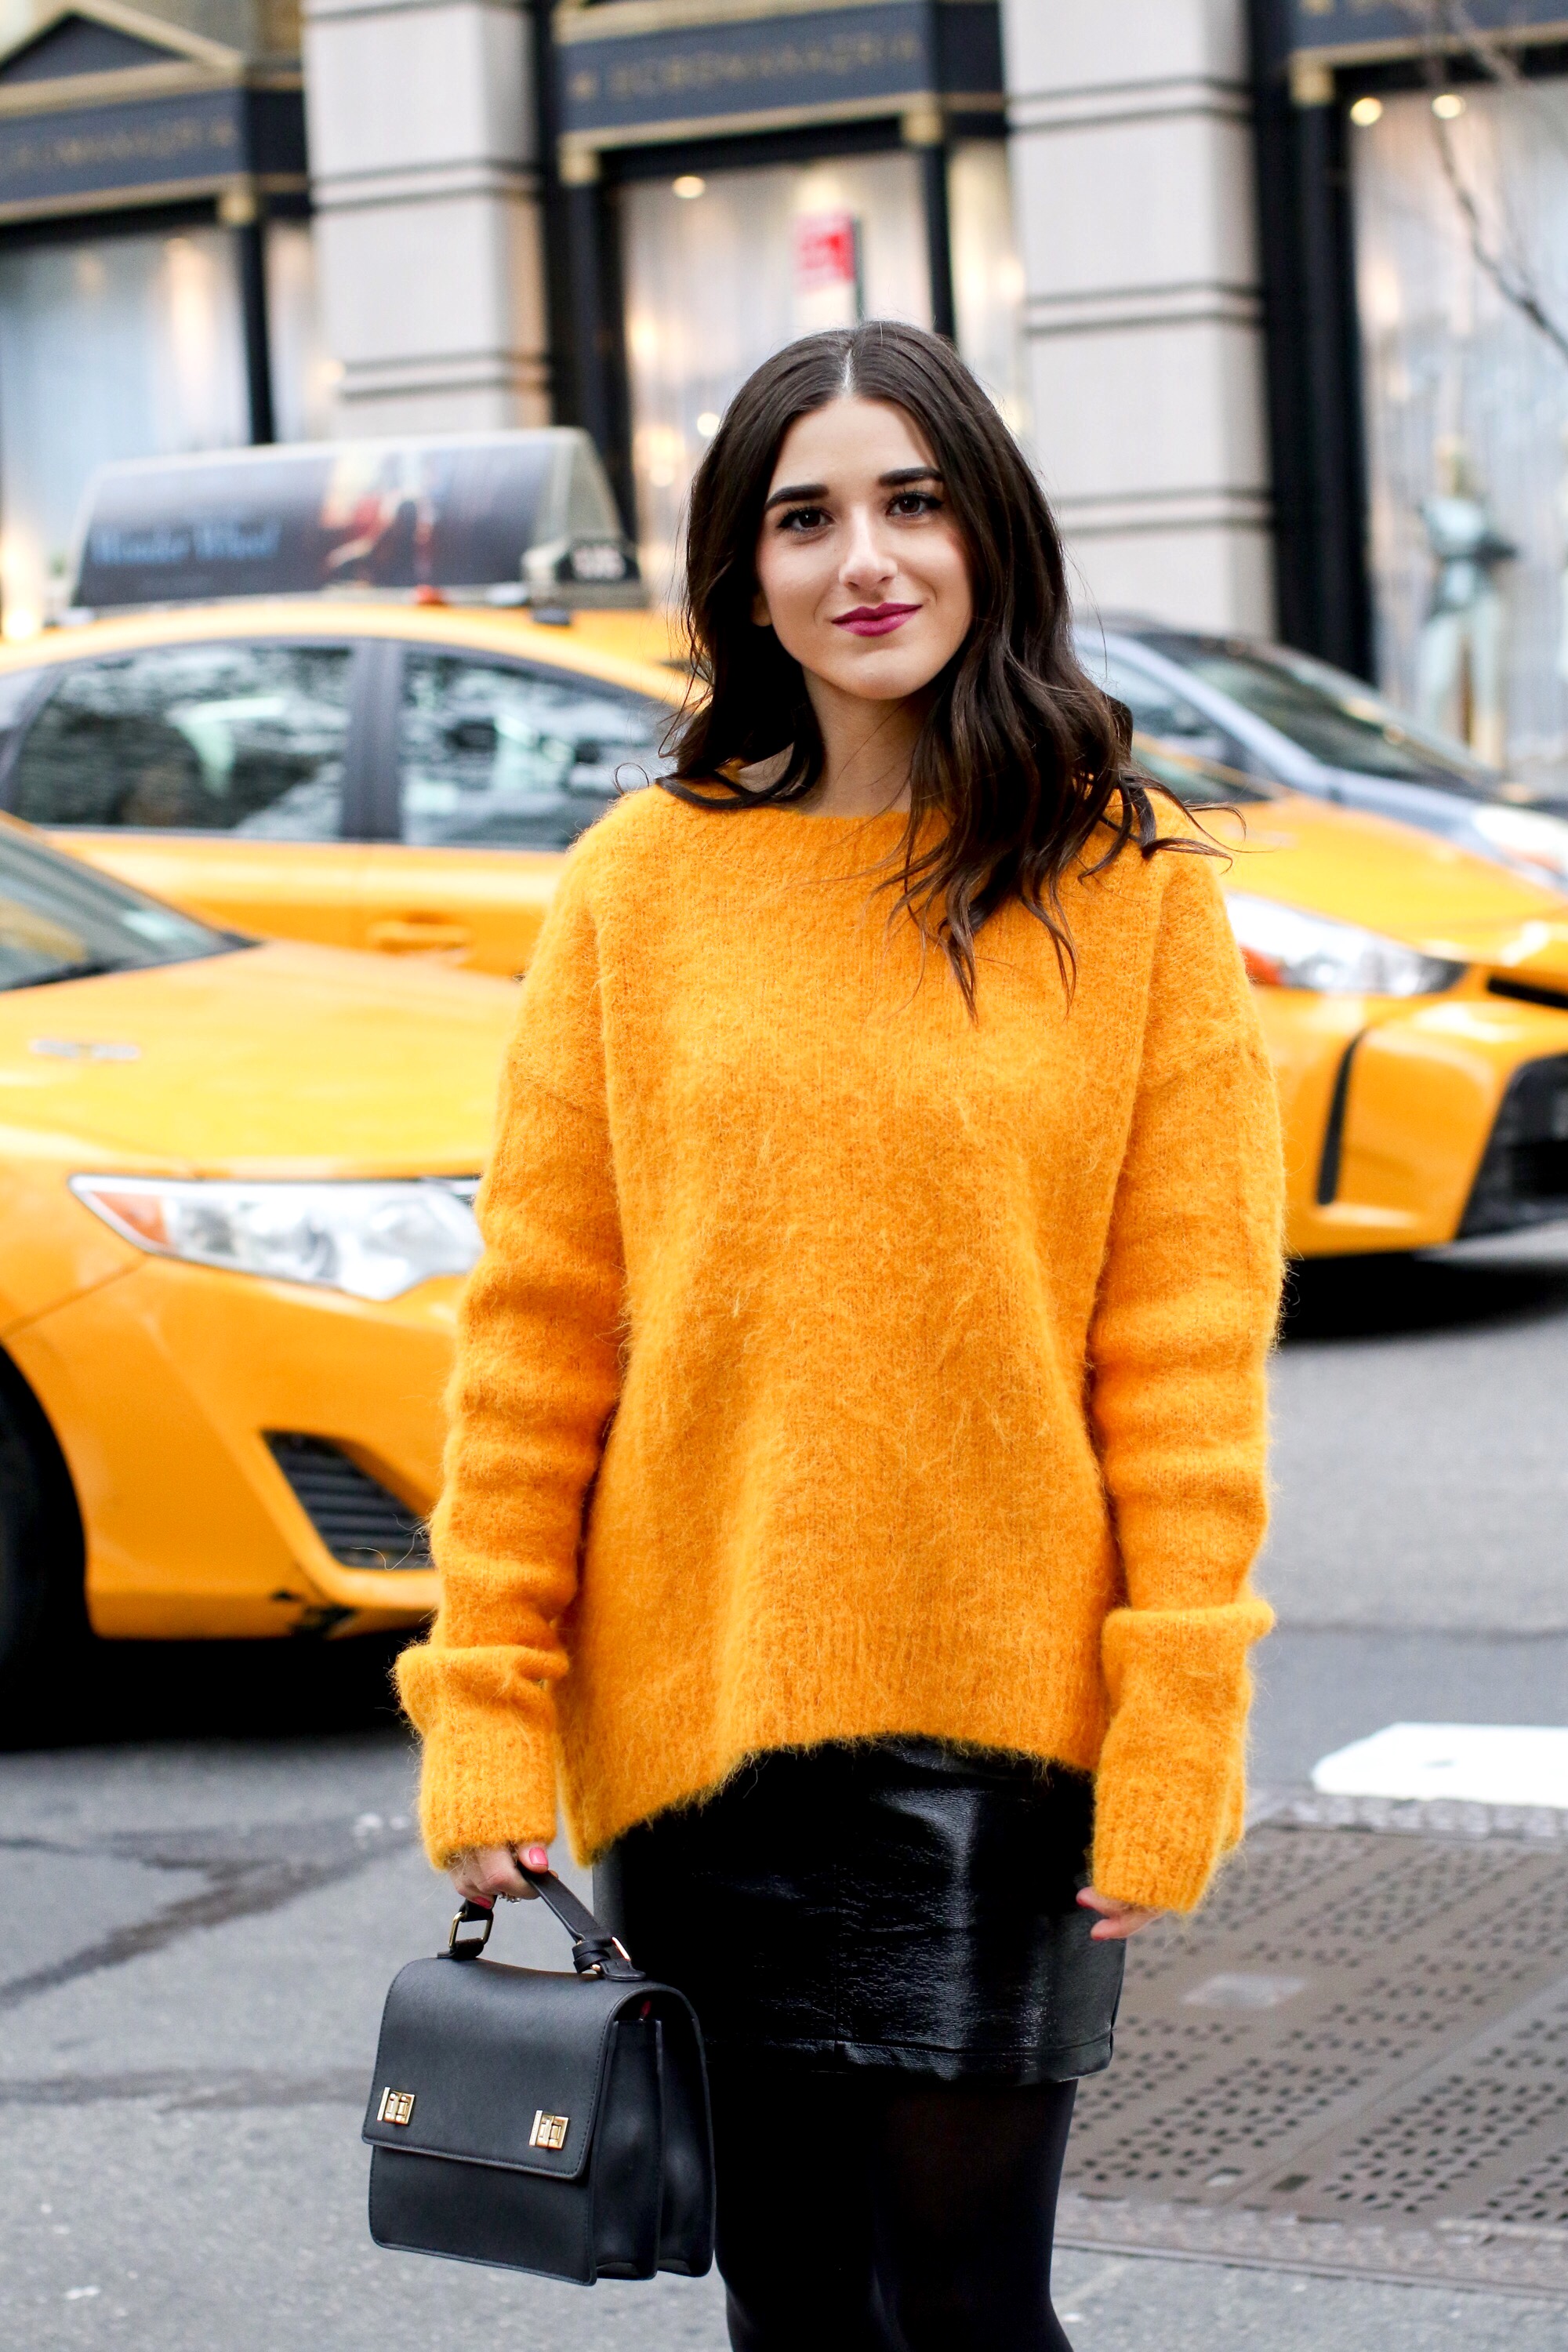 Yellow Sweater Pleather Skirt Why You Should Think Before You Unfollow Esther Santer Fashion Blog NYC Street Style Blogger Outfit OOTD Trendy Cozy Winter Look Girl Women Oversized Top New York City  Instagram Tips DSW Studded Boots H&M Topshop Details.jpg